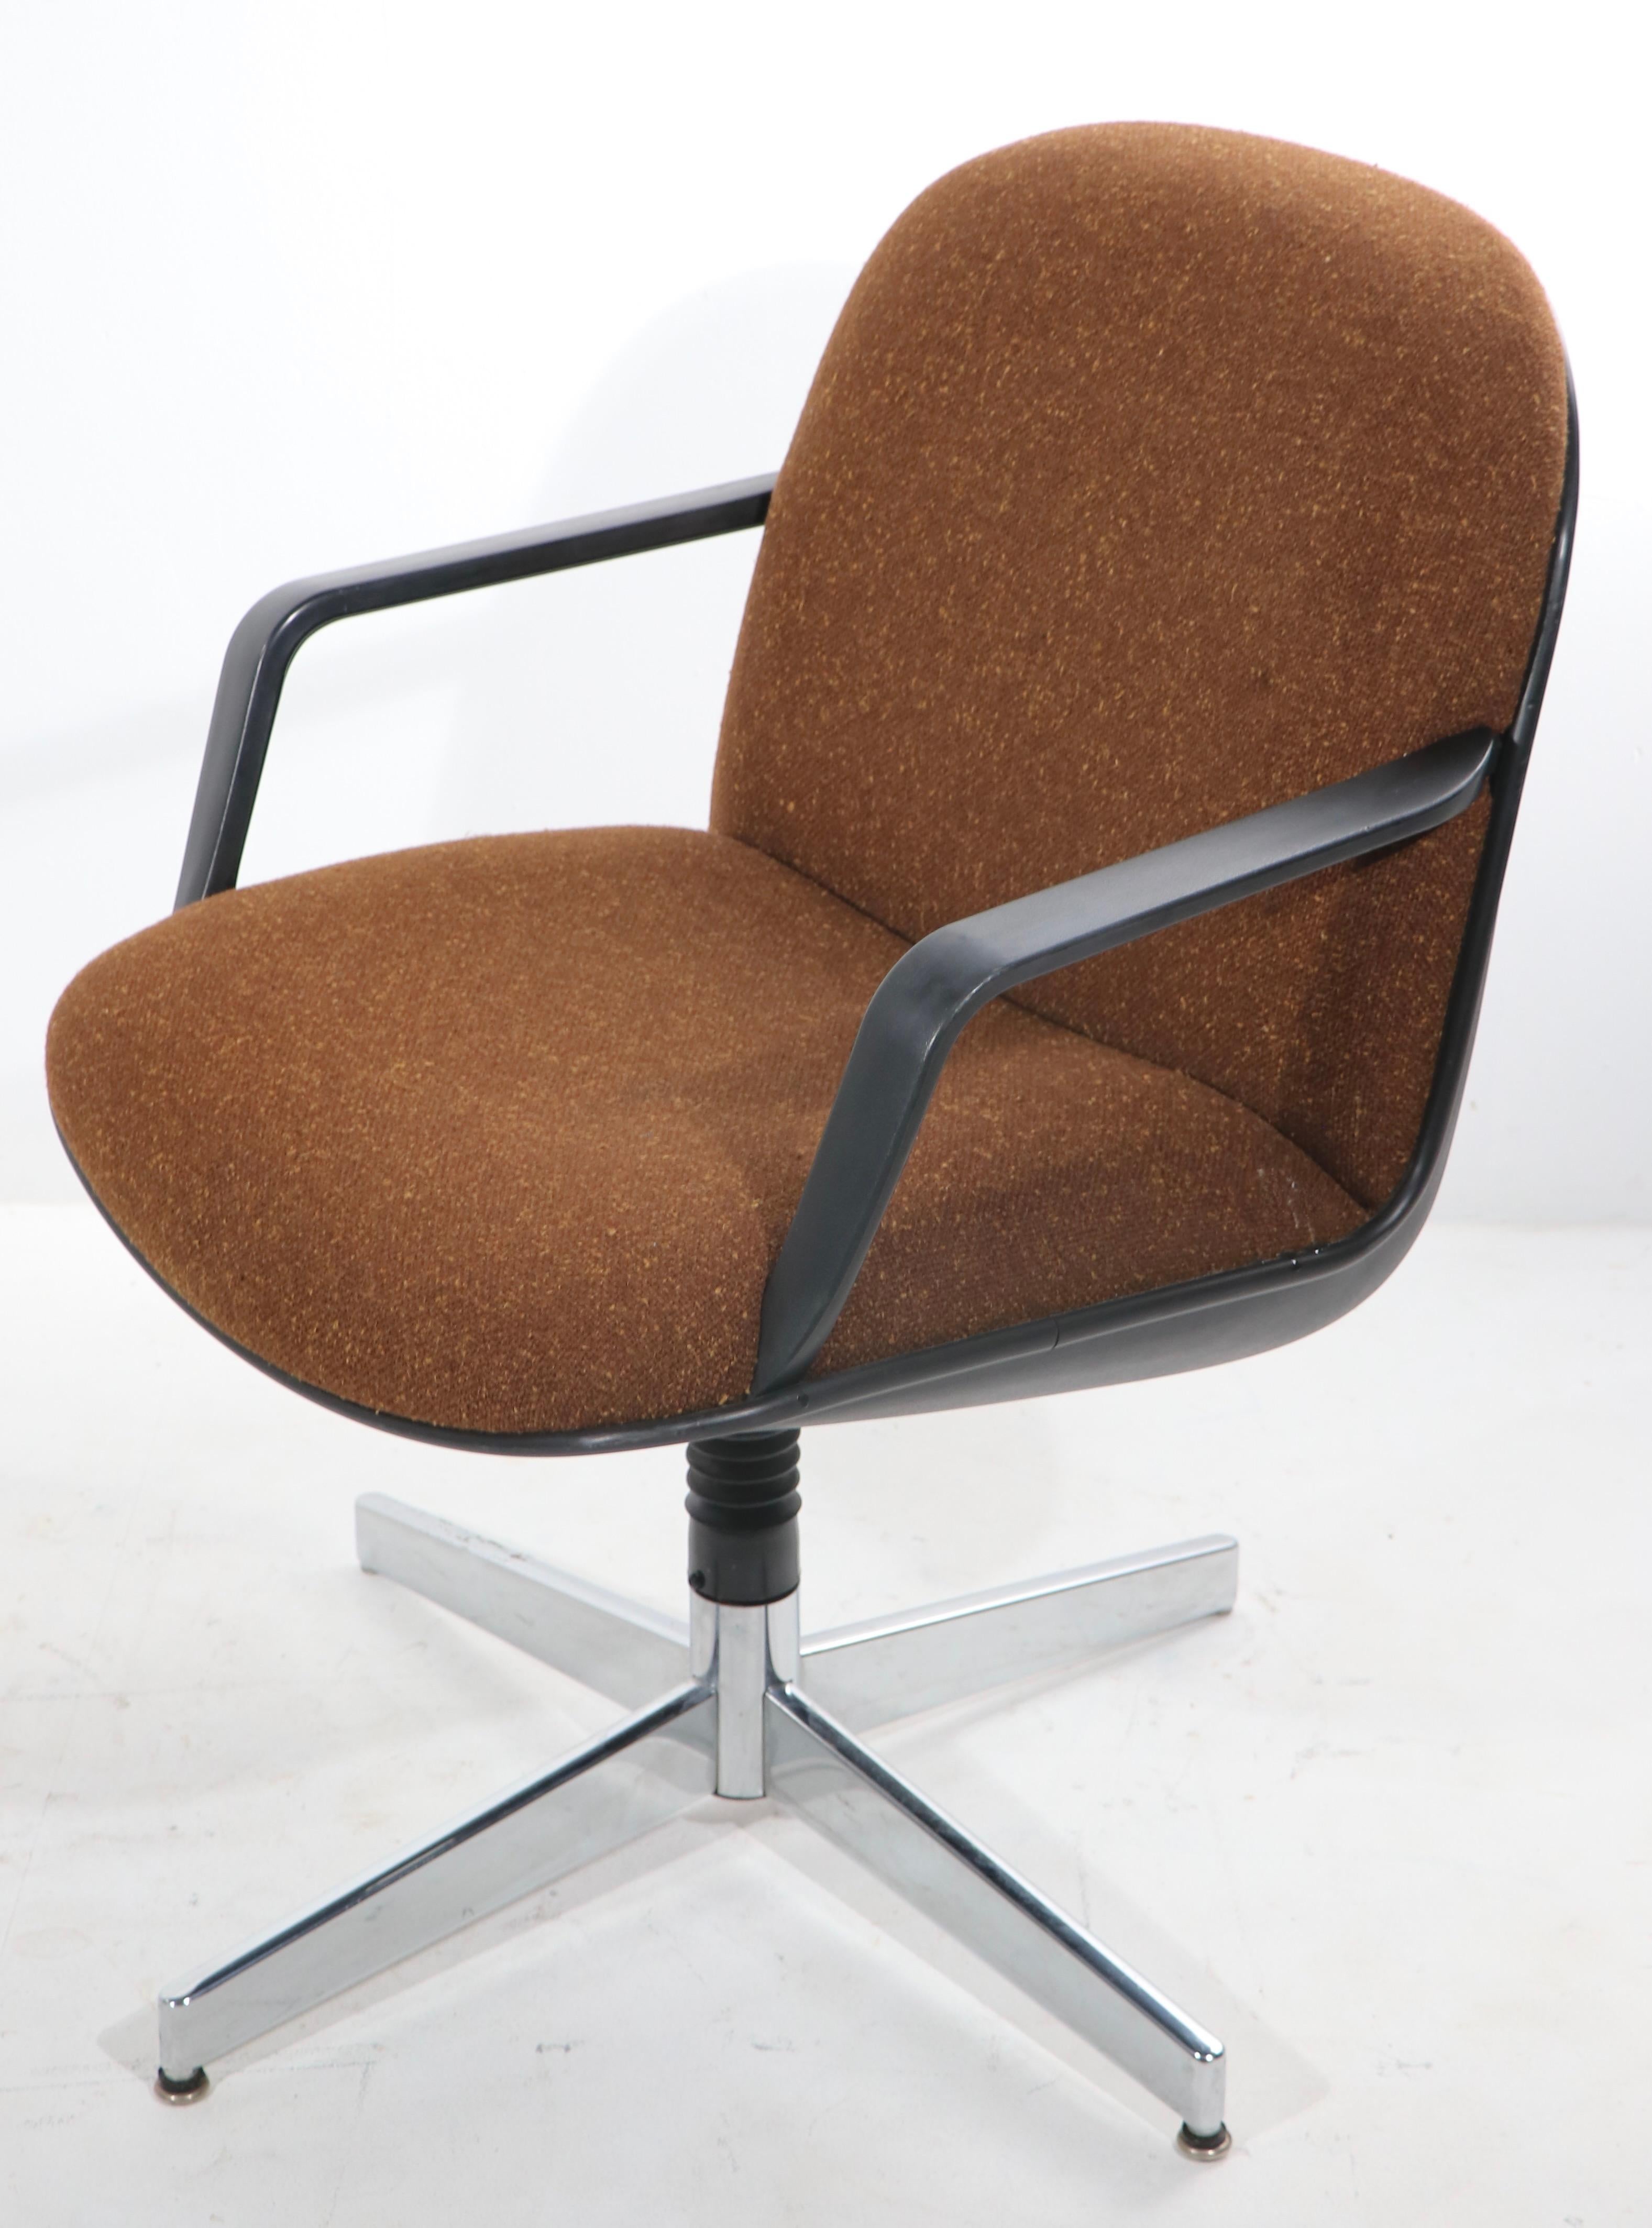 Stylish ergonomic design swivel arm chairs, perfect for commercial use, desk or conference room, also can be used residentially as well. Made by noted manufacturer HON, in the style of the iconic Pollock for Knoll chairs.
Six chairs available,